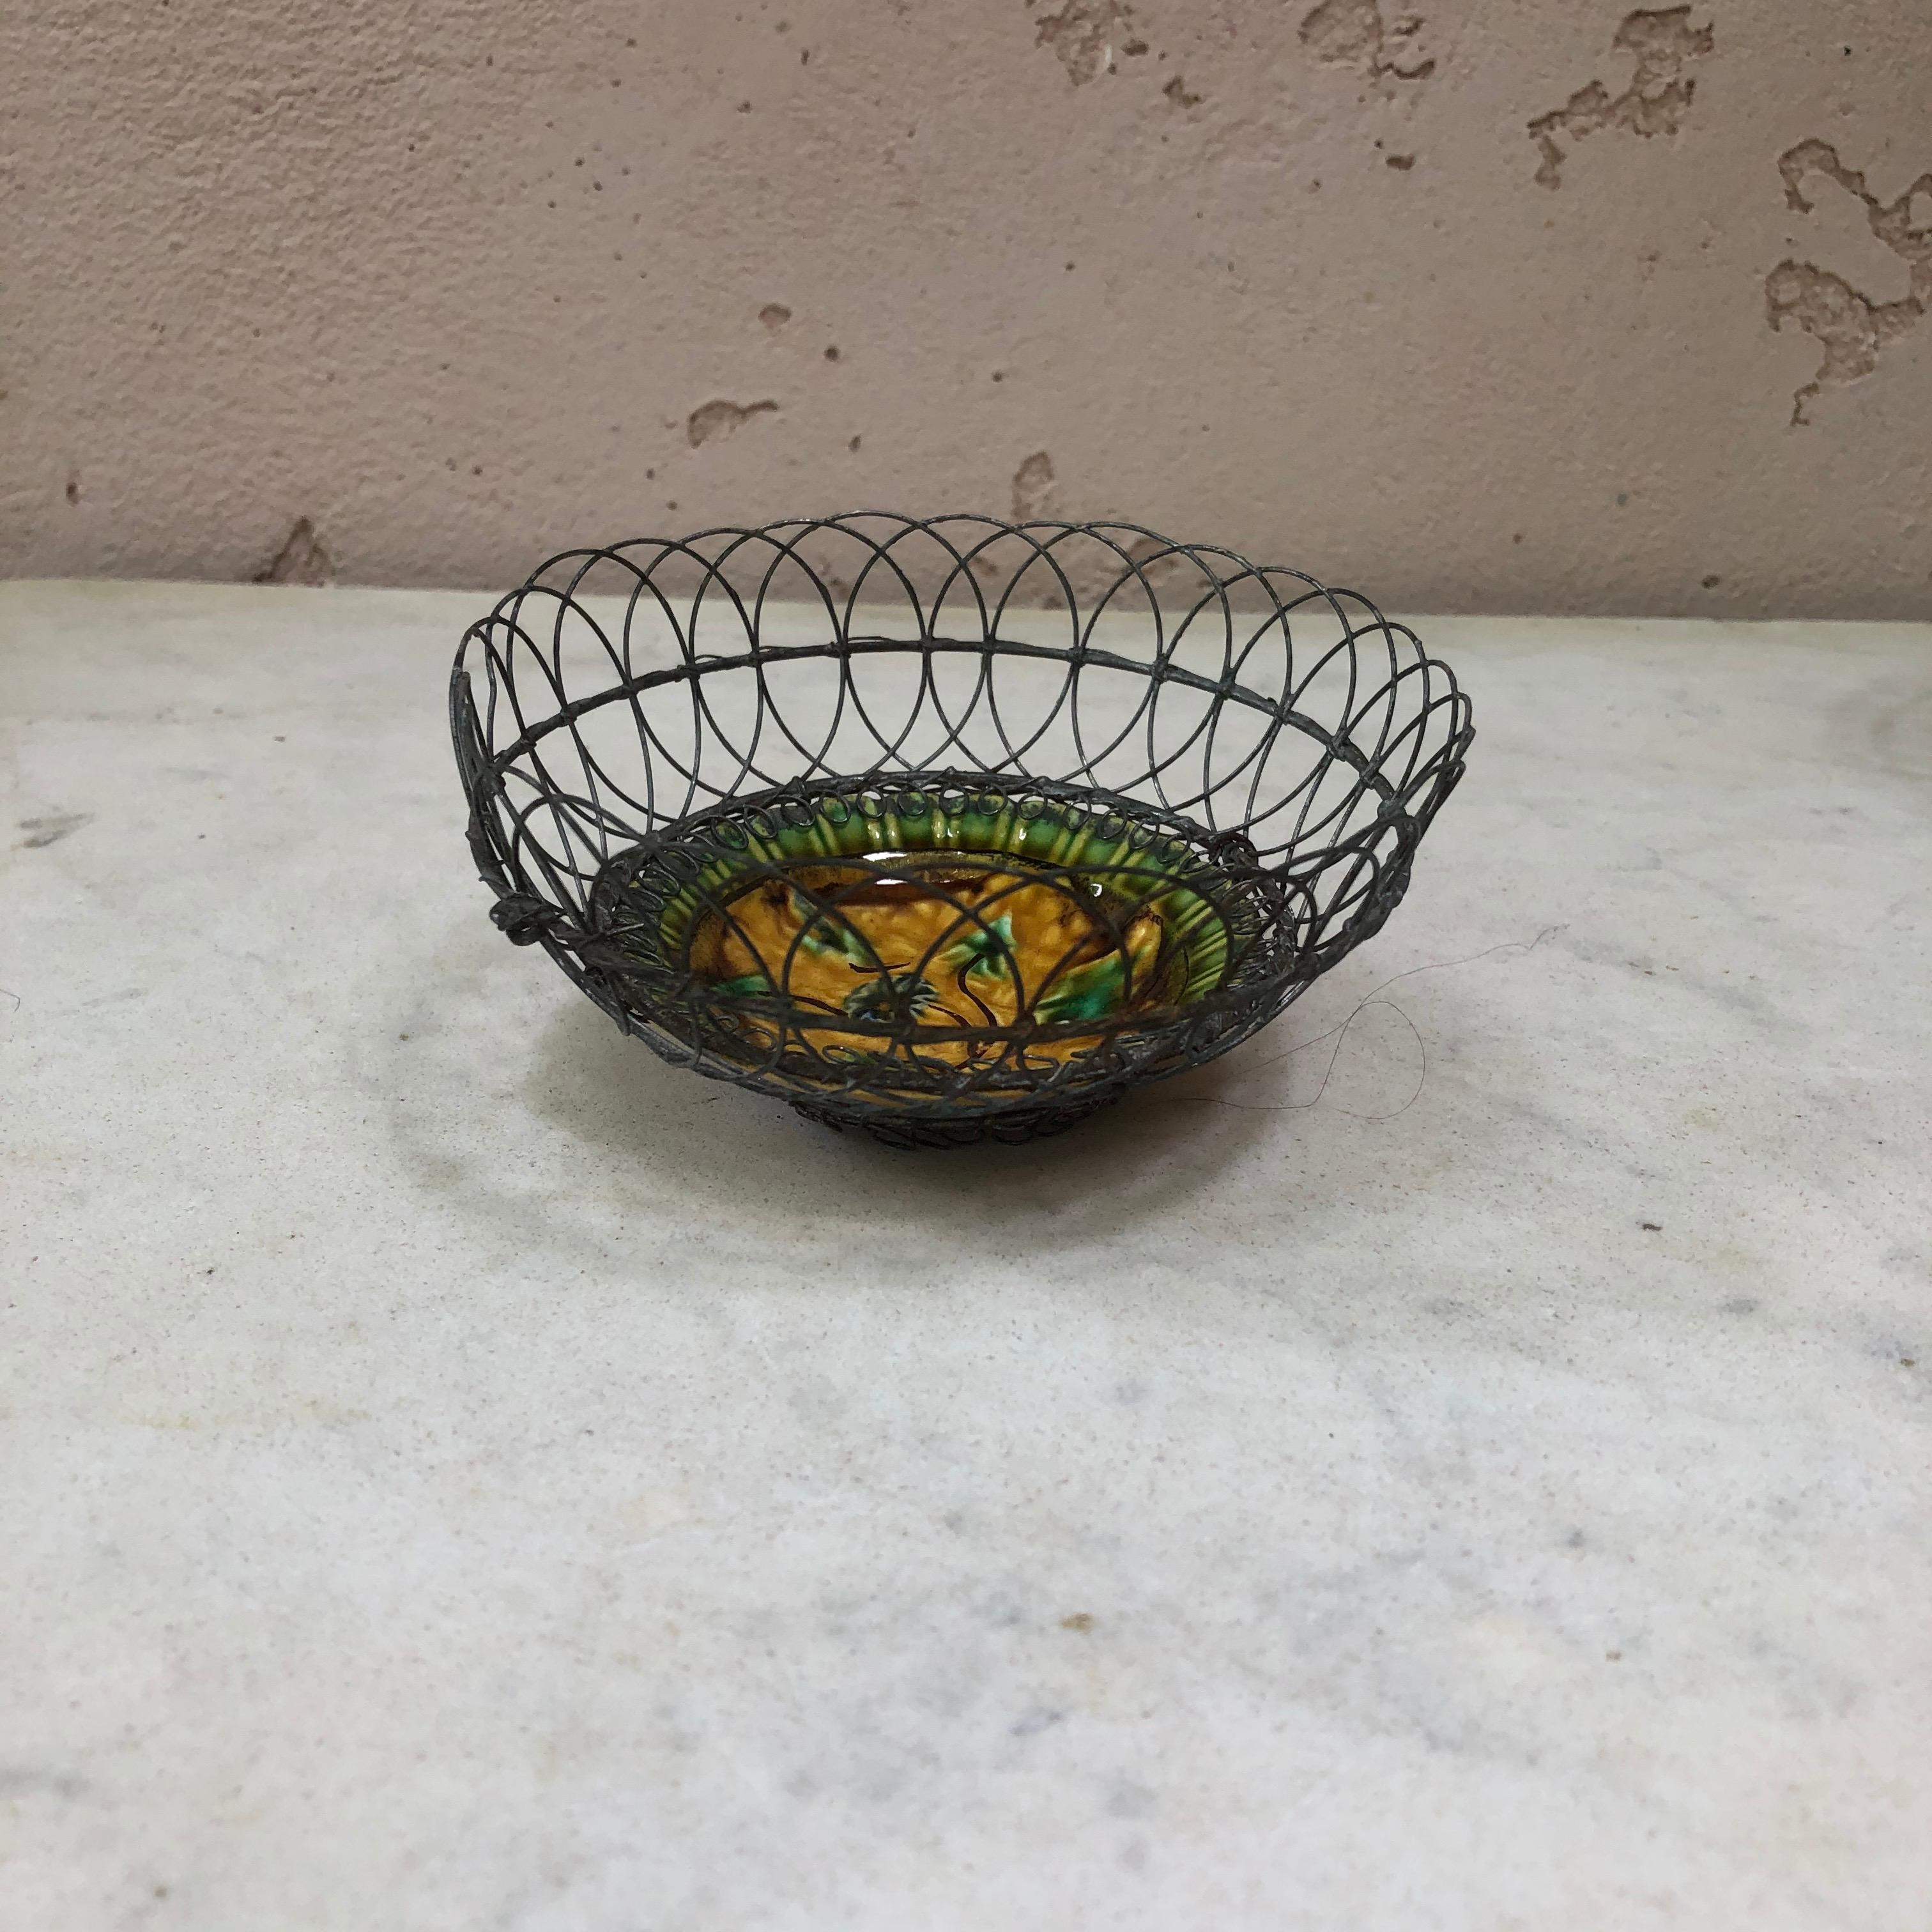 Charming Majolica wire basket with leaves Villeroy & Boch, Circa 1900.